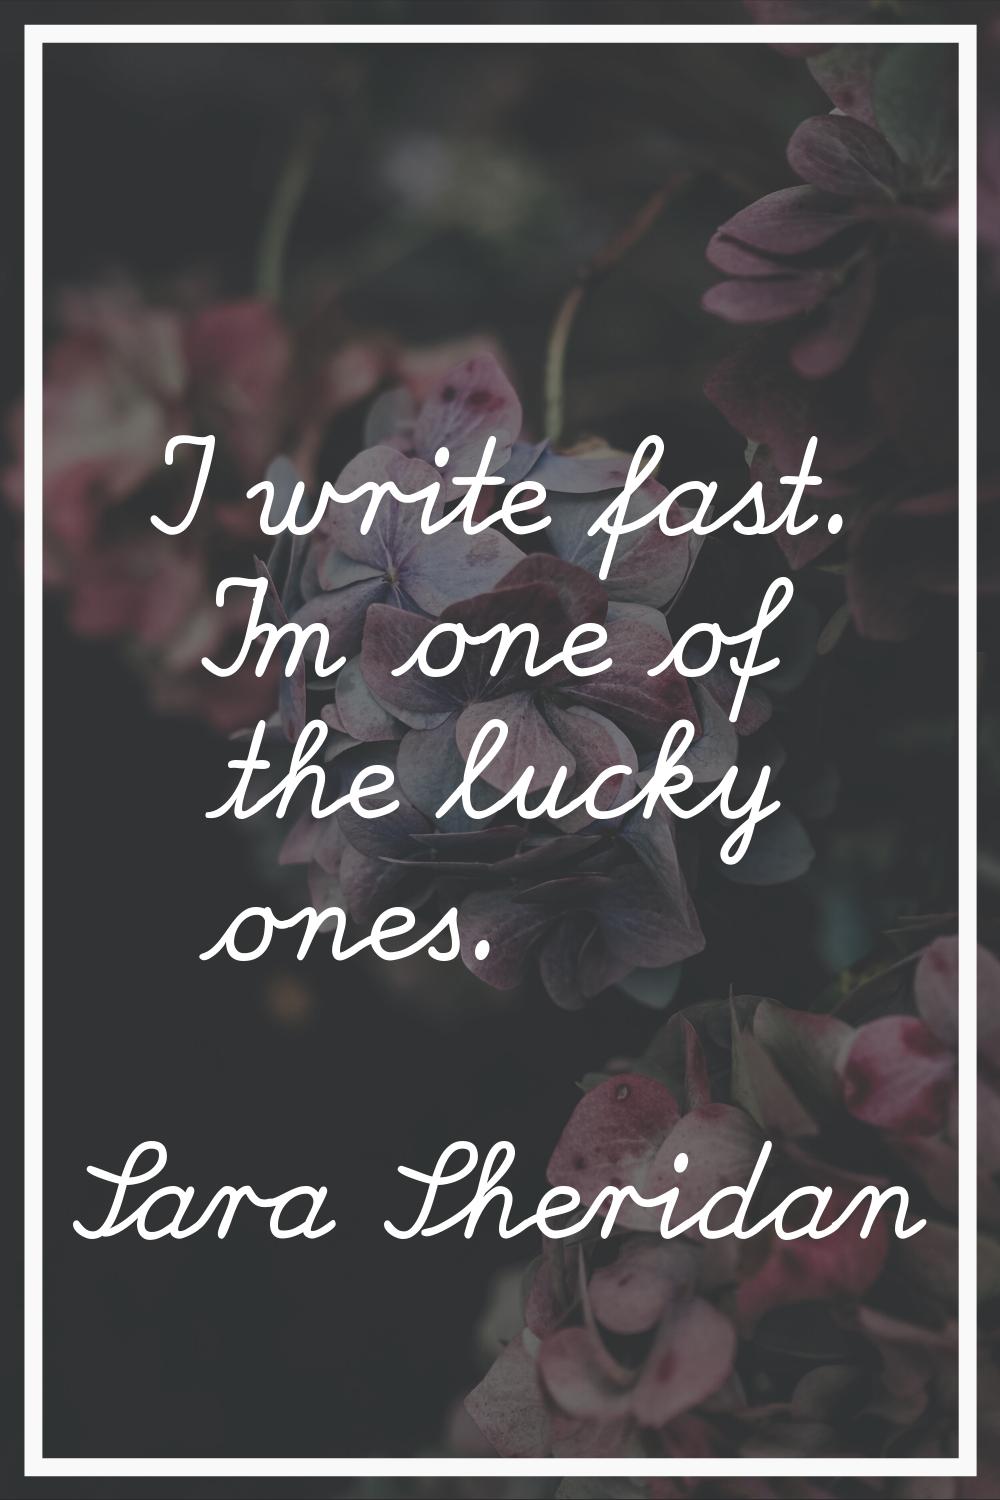 I write fast. I'm one of the lucky ones.